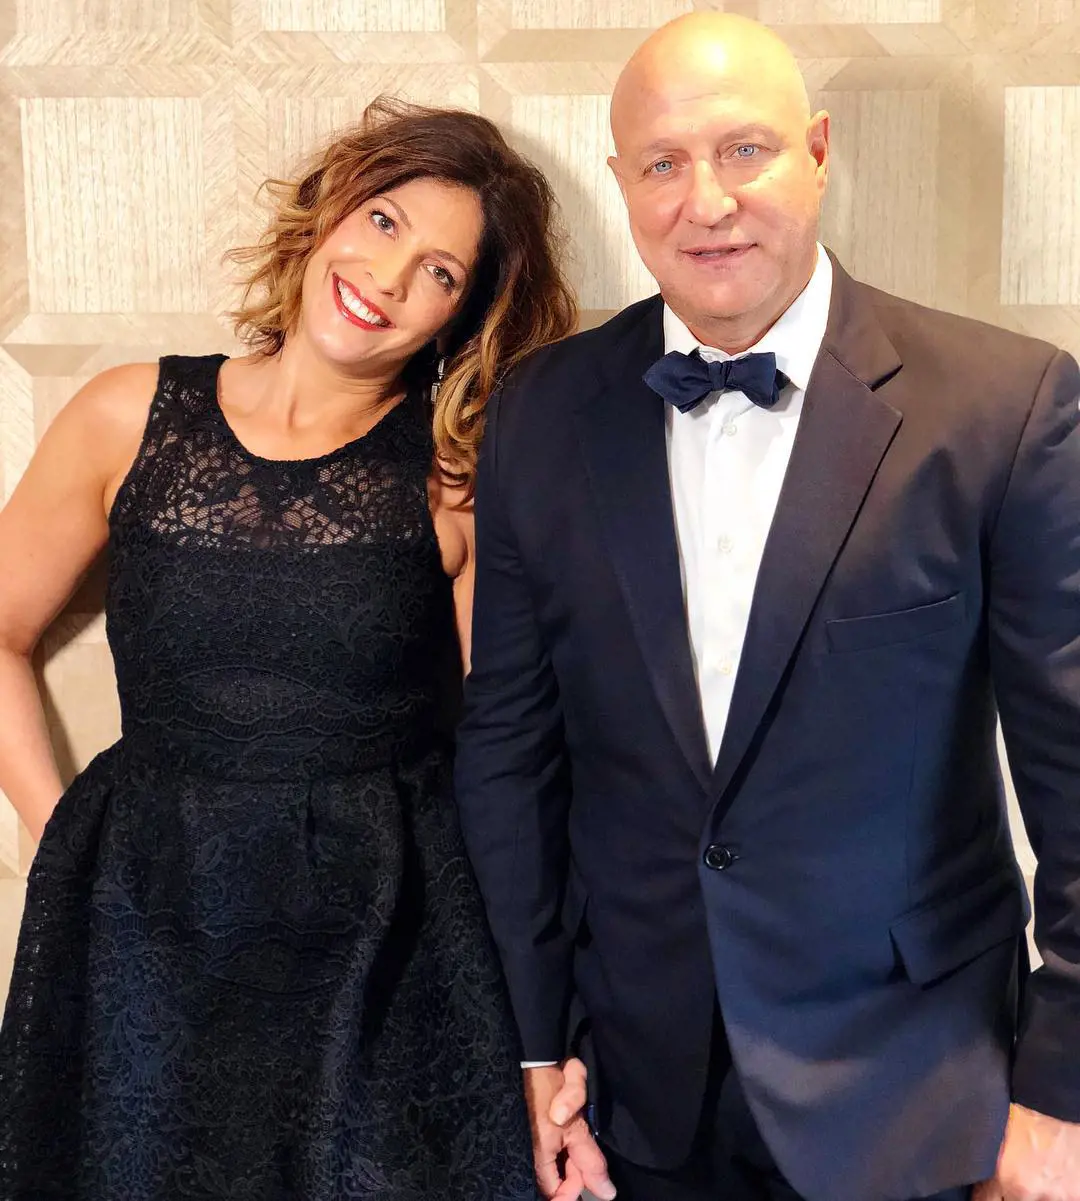 Tom and his wife Lori Silverbush arrive at the Emmy Awards 2018 dressed in matching black outfits. 